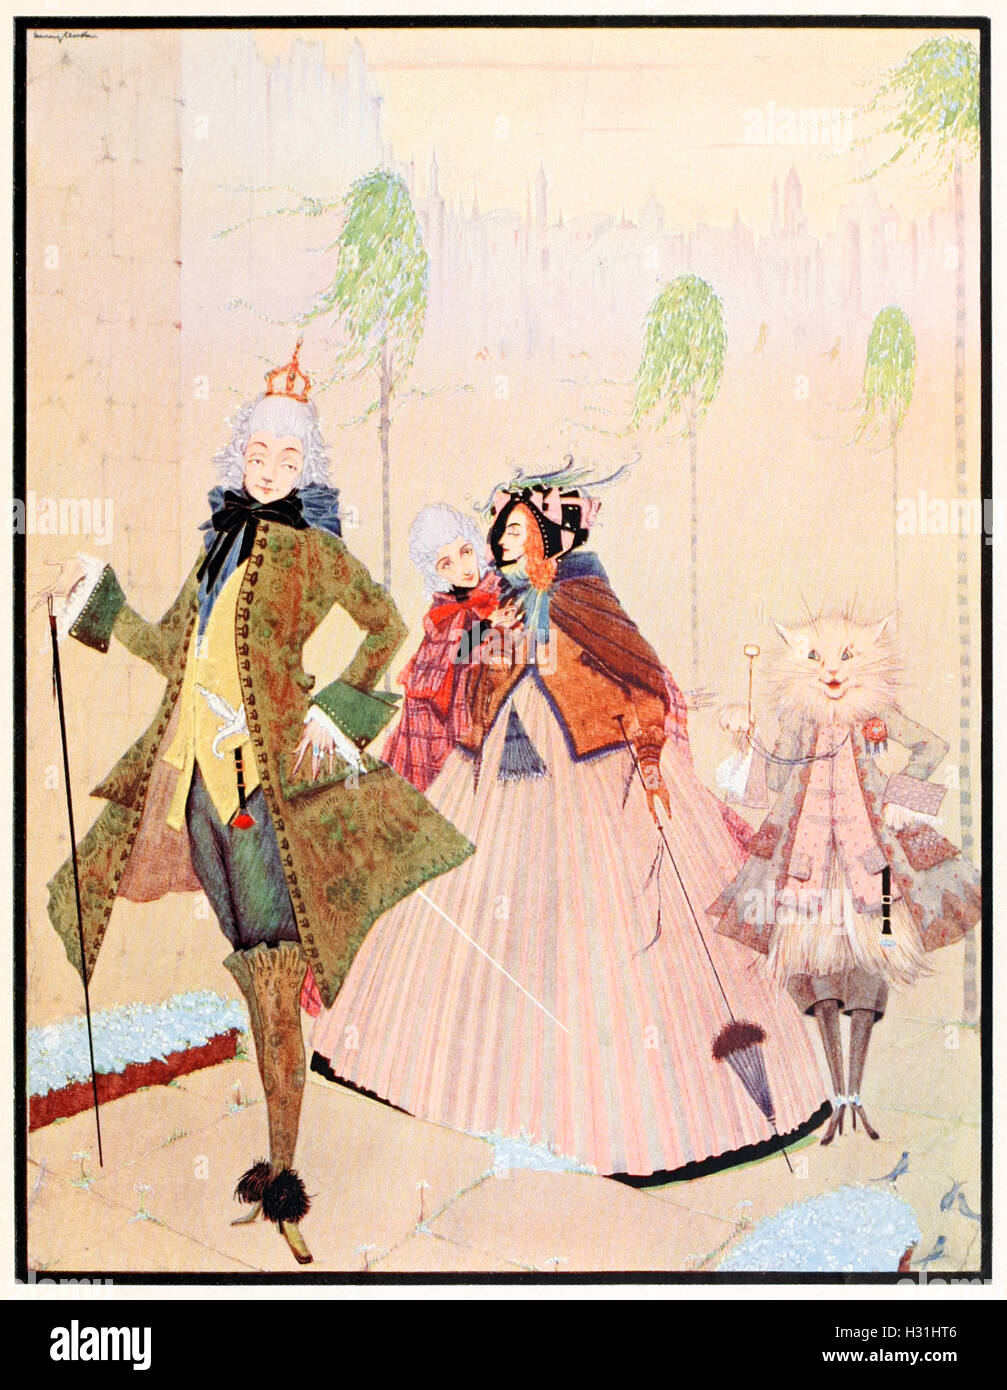 “The Marquis gave his hand to the Princess, and followed the King who went up first.” Illustration from ‘The Master Cat or Puss in Boots’ by Harry Clarke (1889-1931). See description for more information. Stock Photo